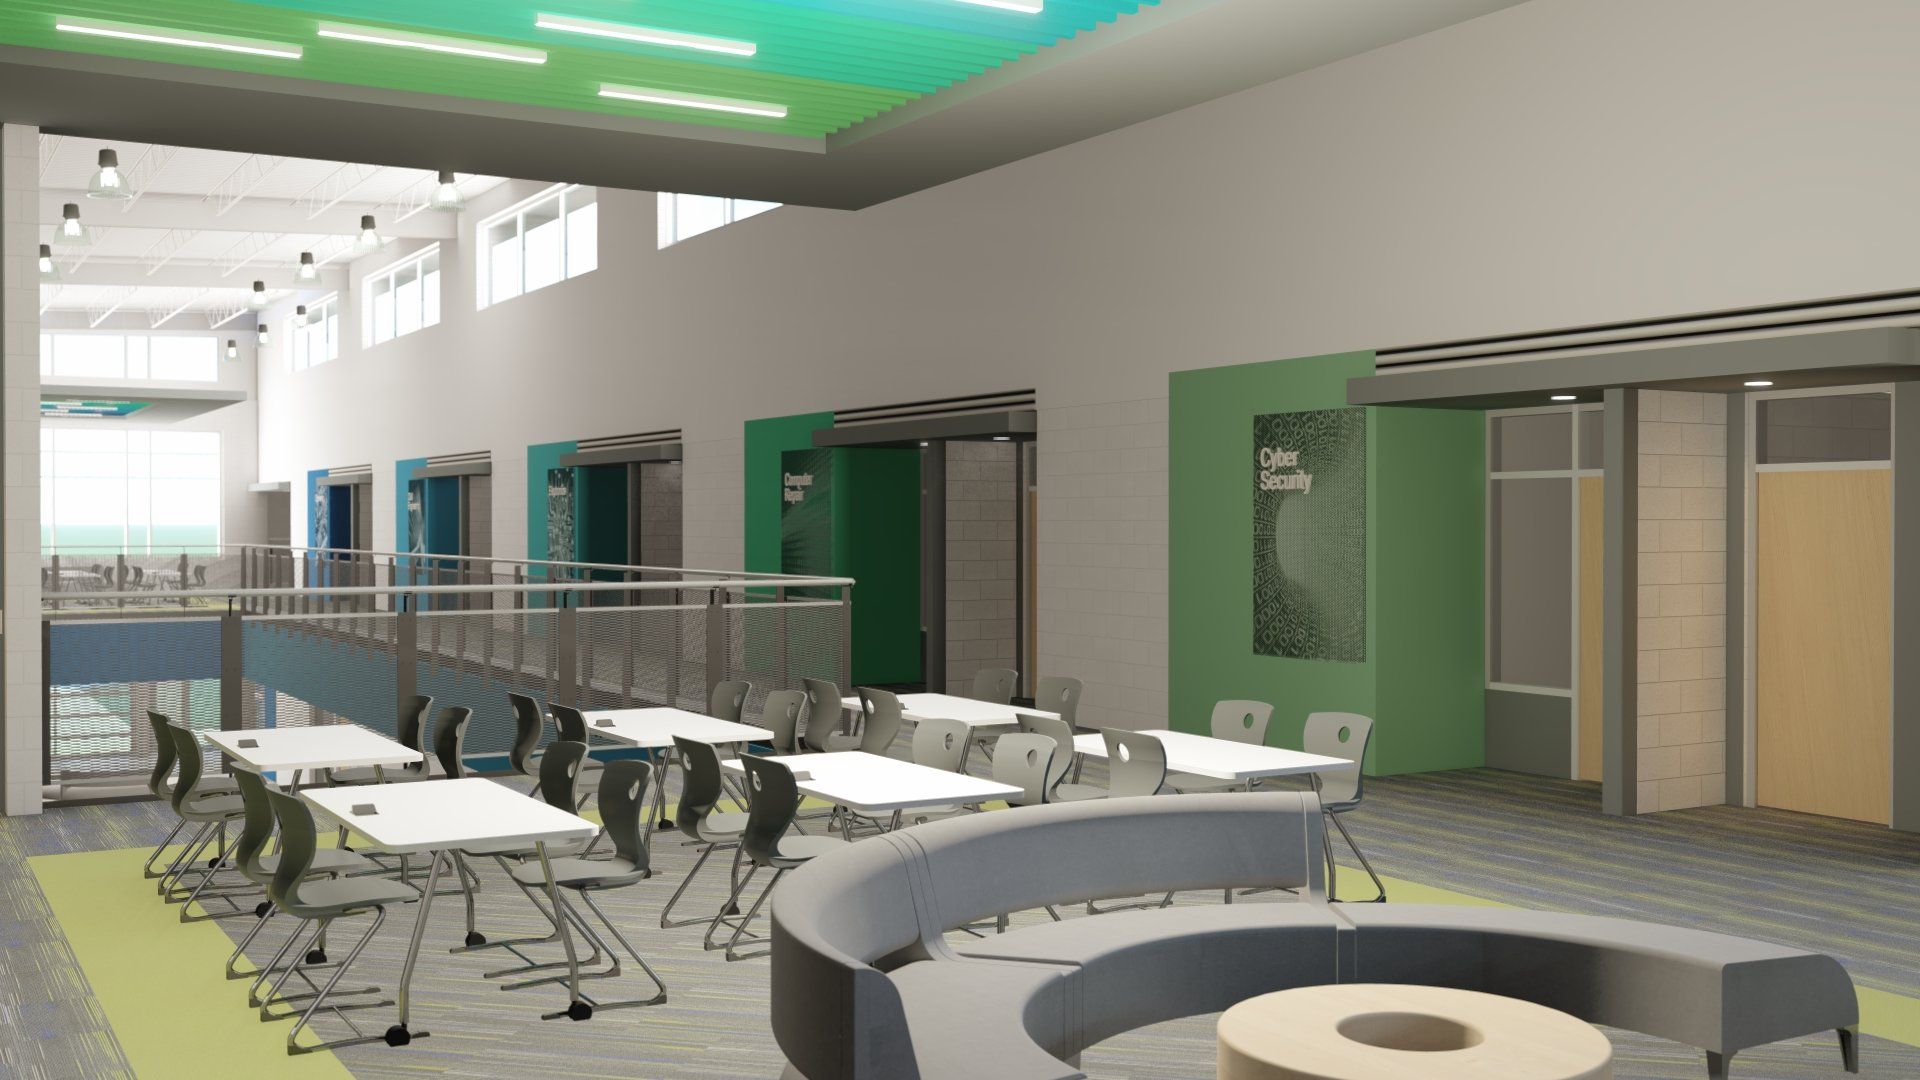 an artist 's impression of a school cafeteria with tables and chairs .